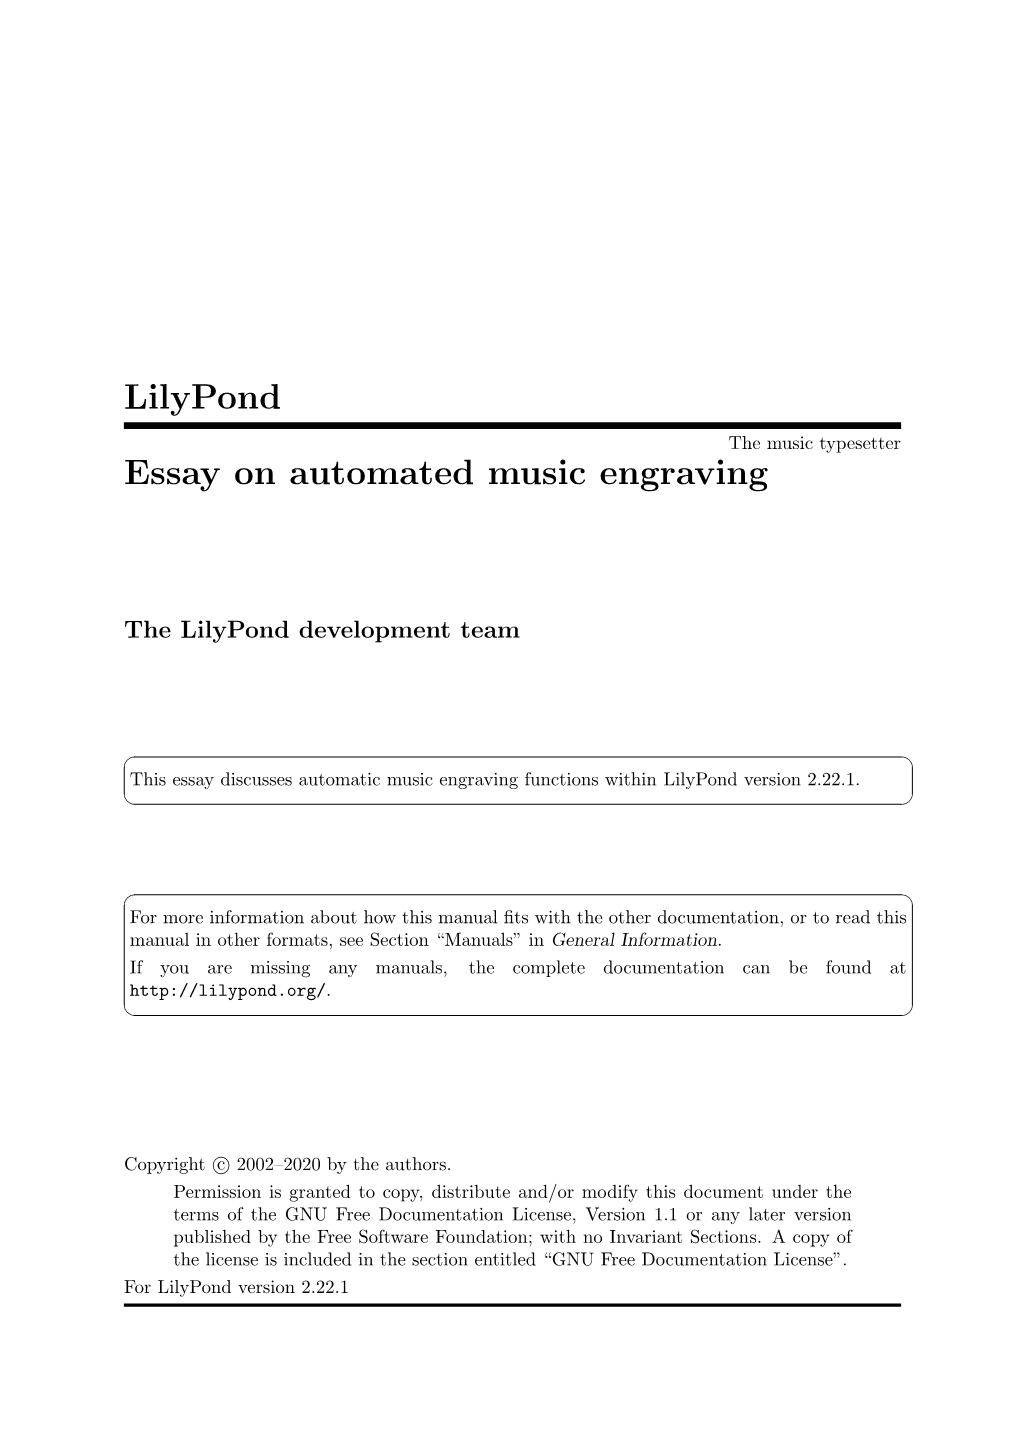 Lilypond Essay on Automated Music Engraving